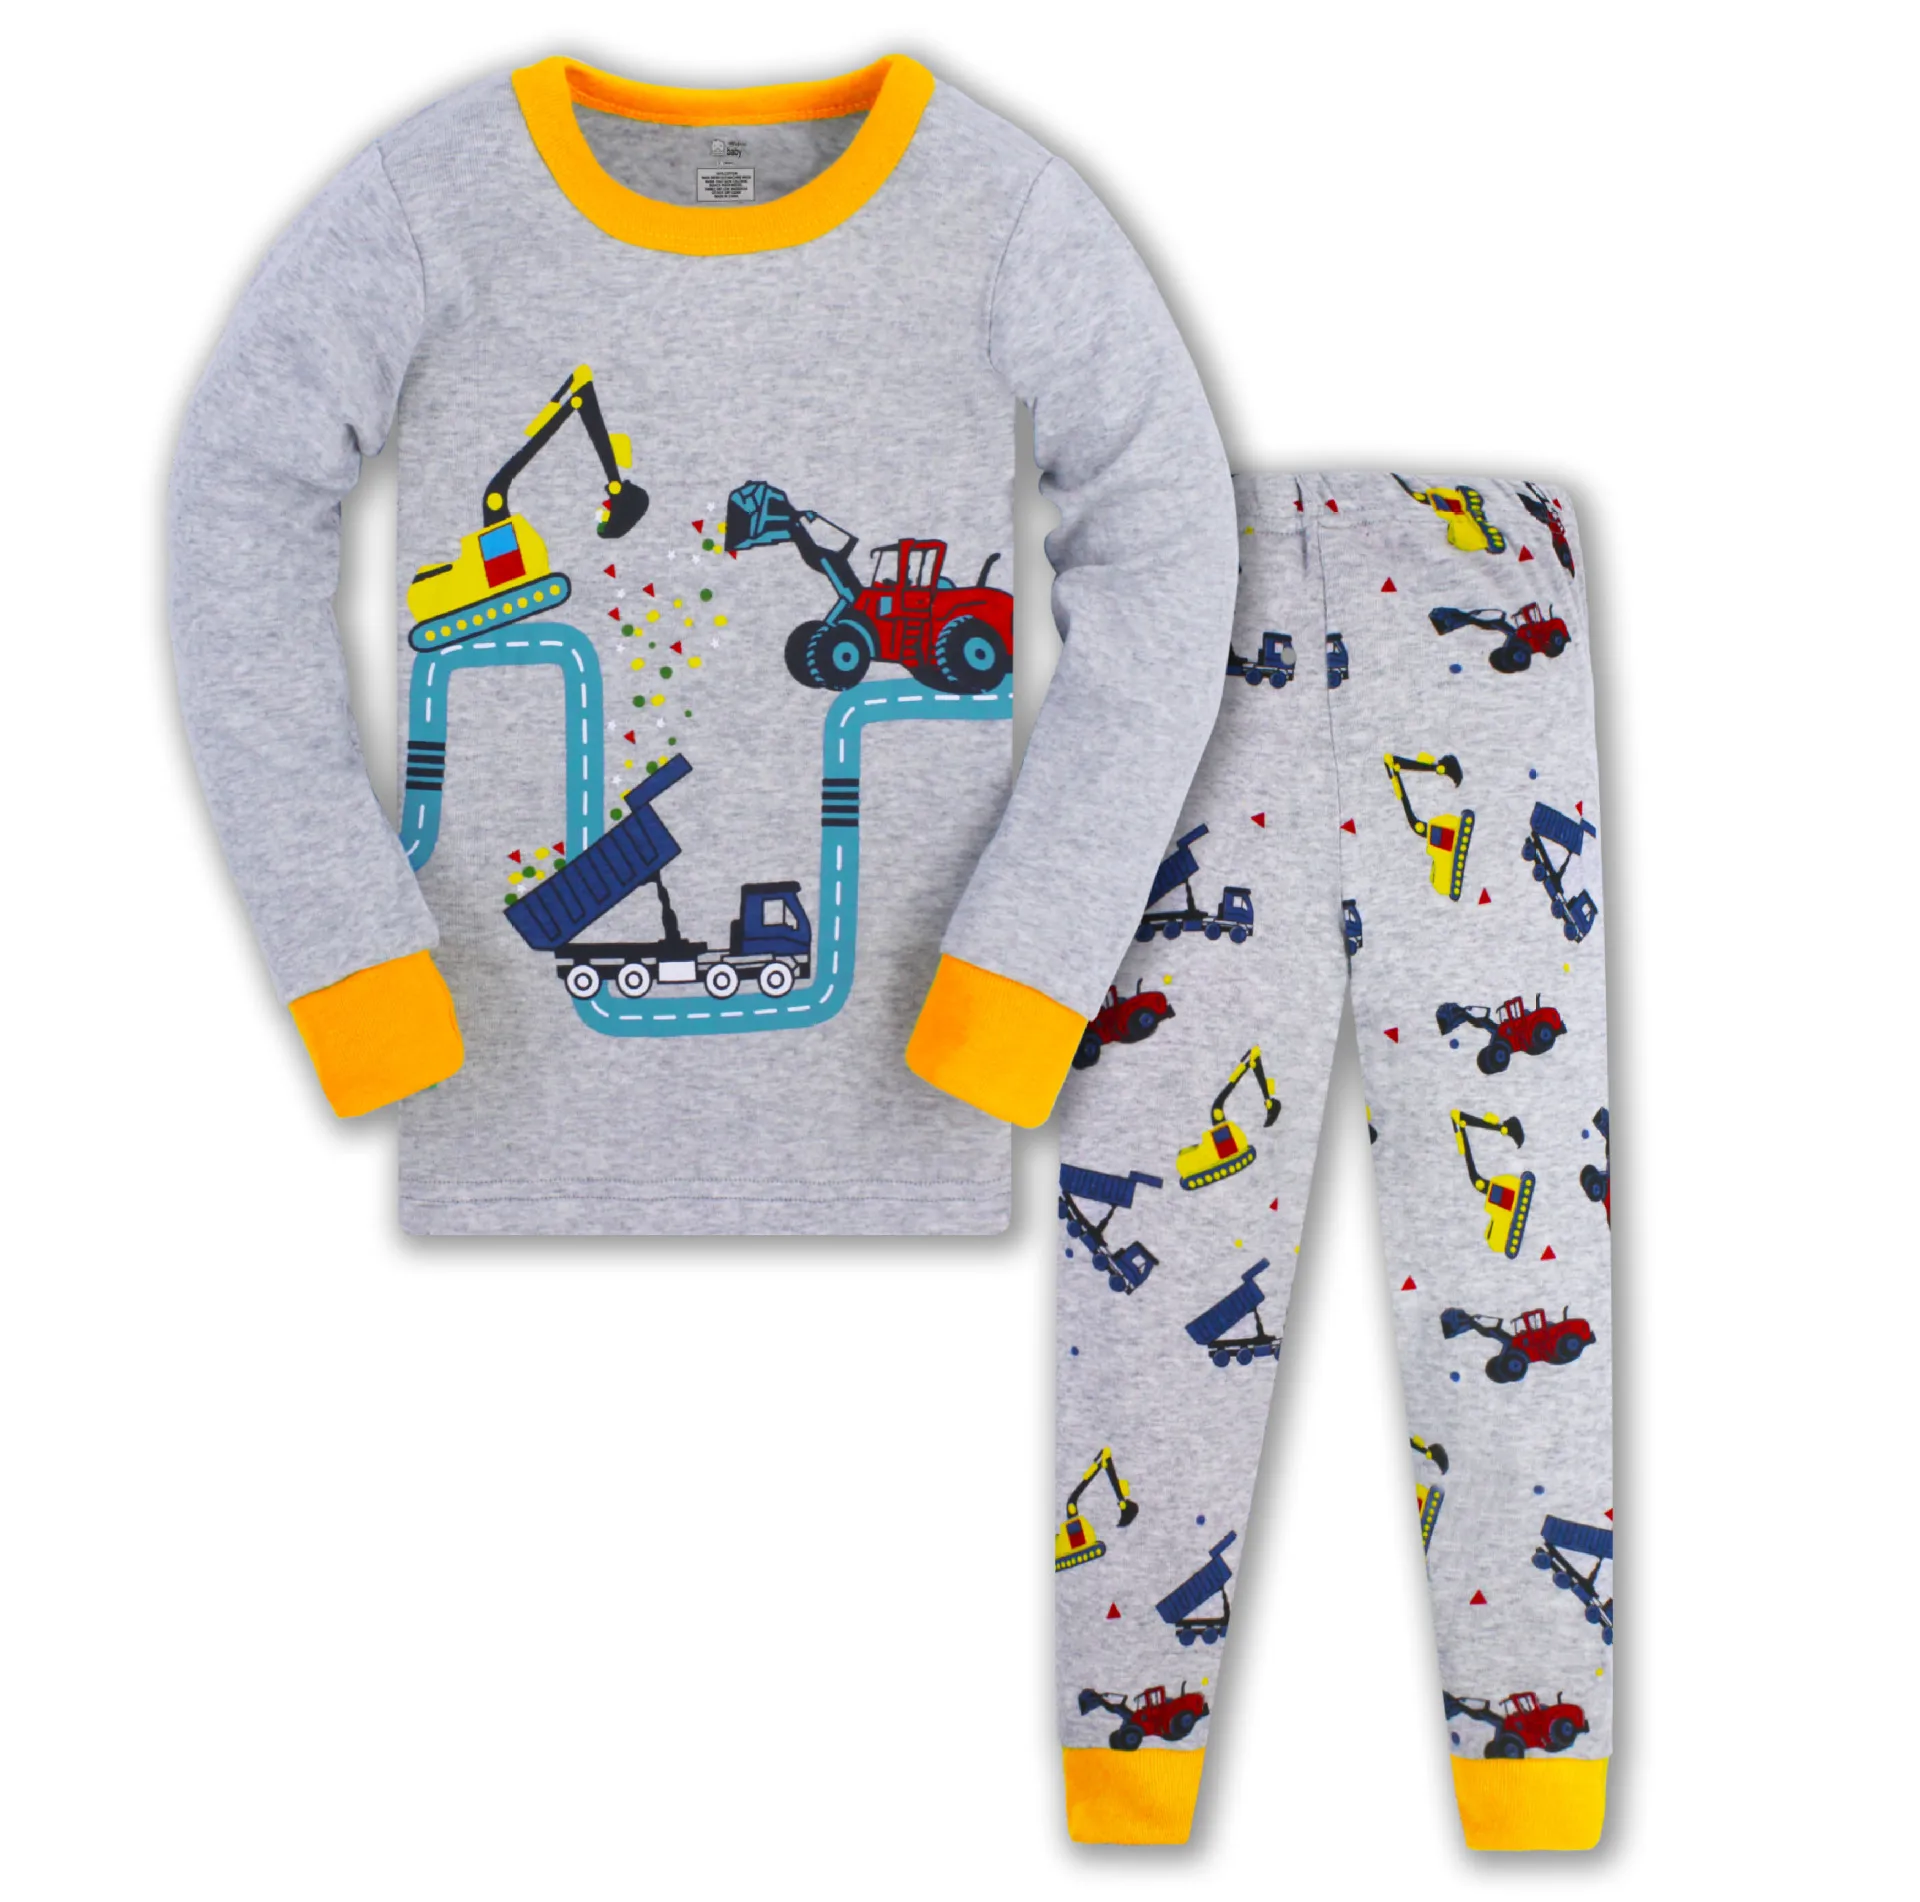 nightgowns elegant Jumping Meters New Arrival Boys Pyjamas For Autumn Spring Kids Cartoon Cars Print Fashion Home Clothes 2 Pcs Outfits Sleepwear pajama sets boy